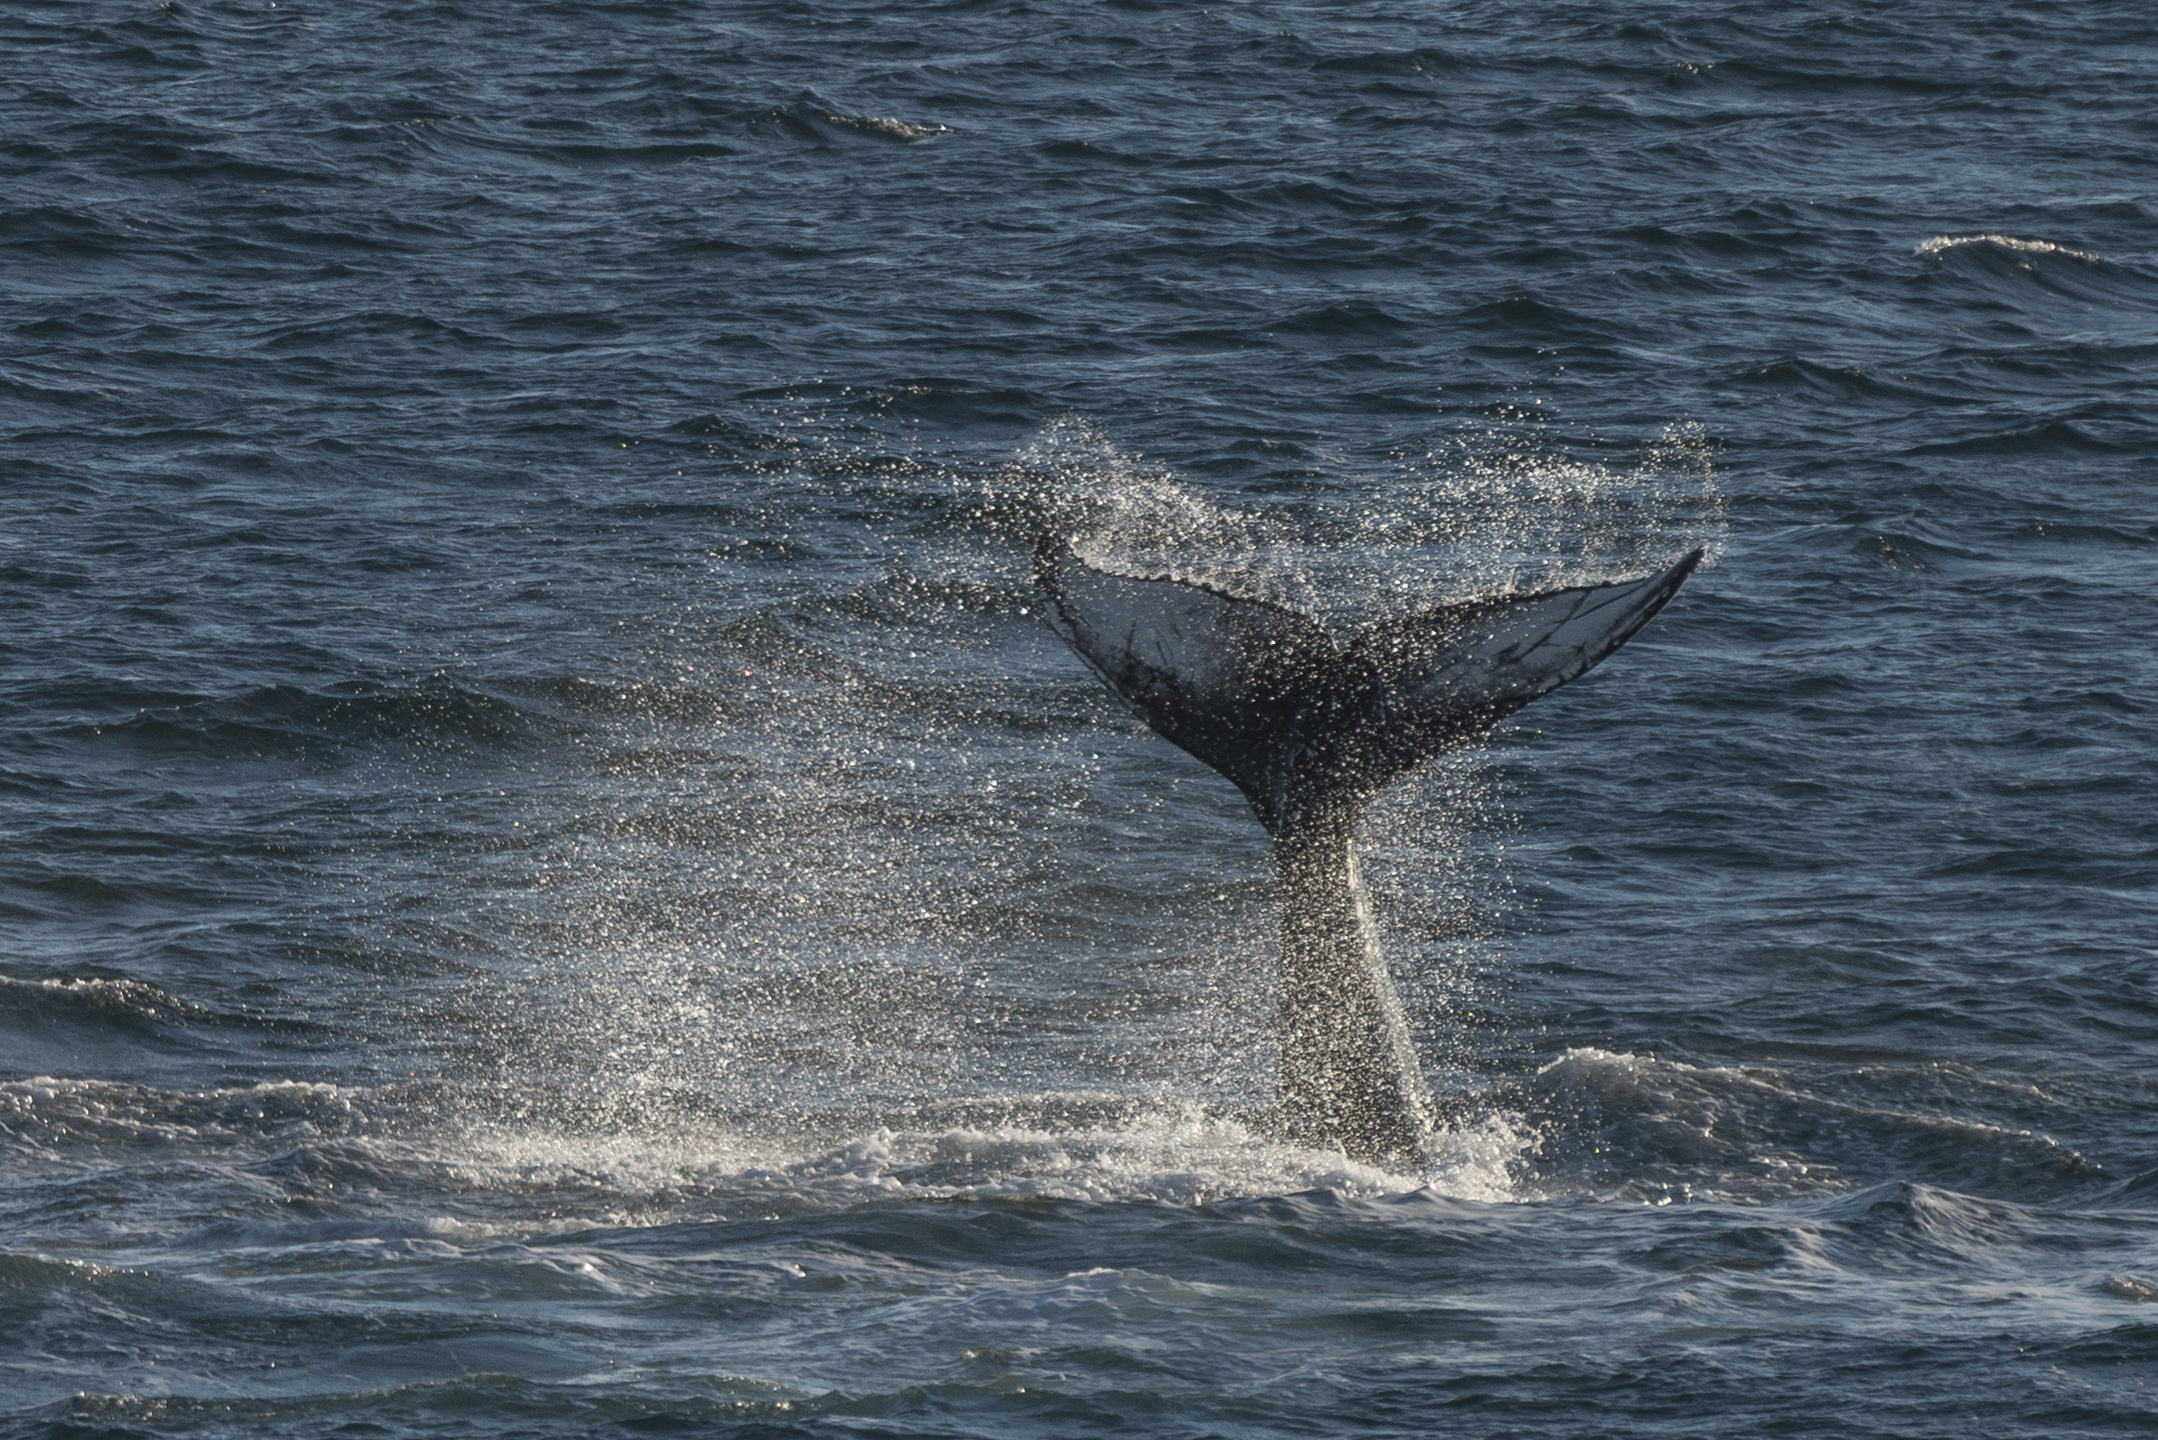 A photograph of the humpback whale in the Arctic was found by volunteer citizen scientists (Iain Rudkin Photography/PA)